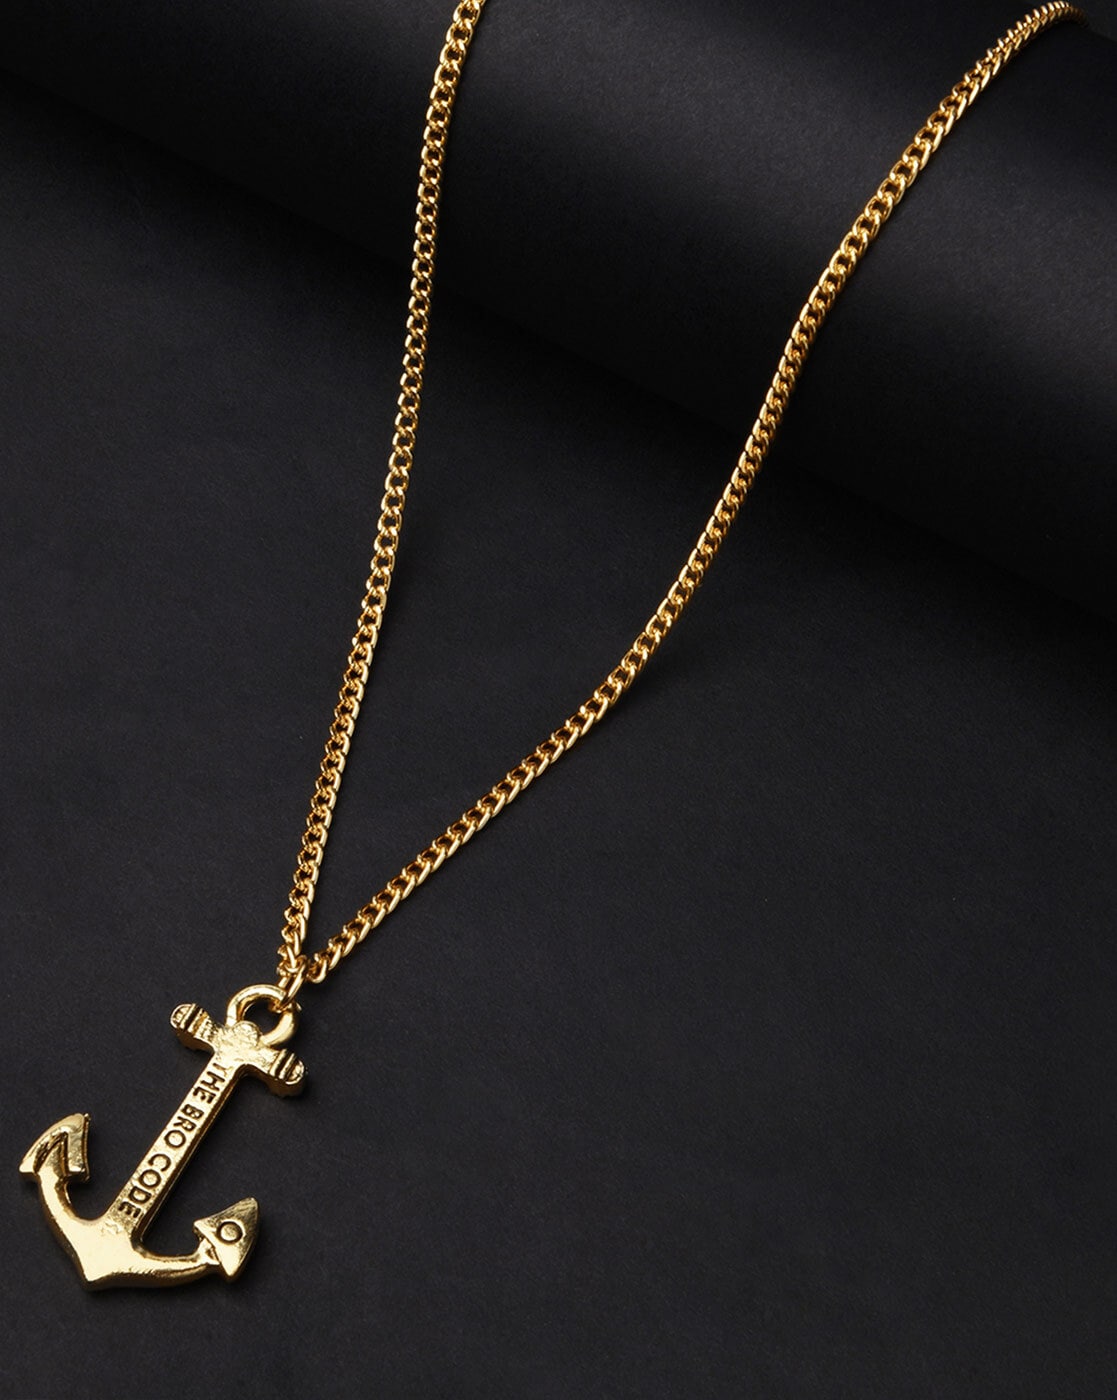 Anchor Necklace 10K Yellow Gold 22